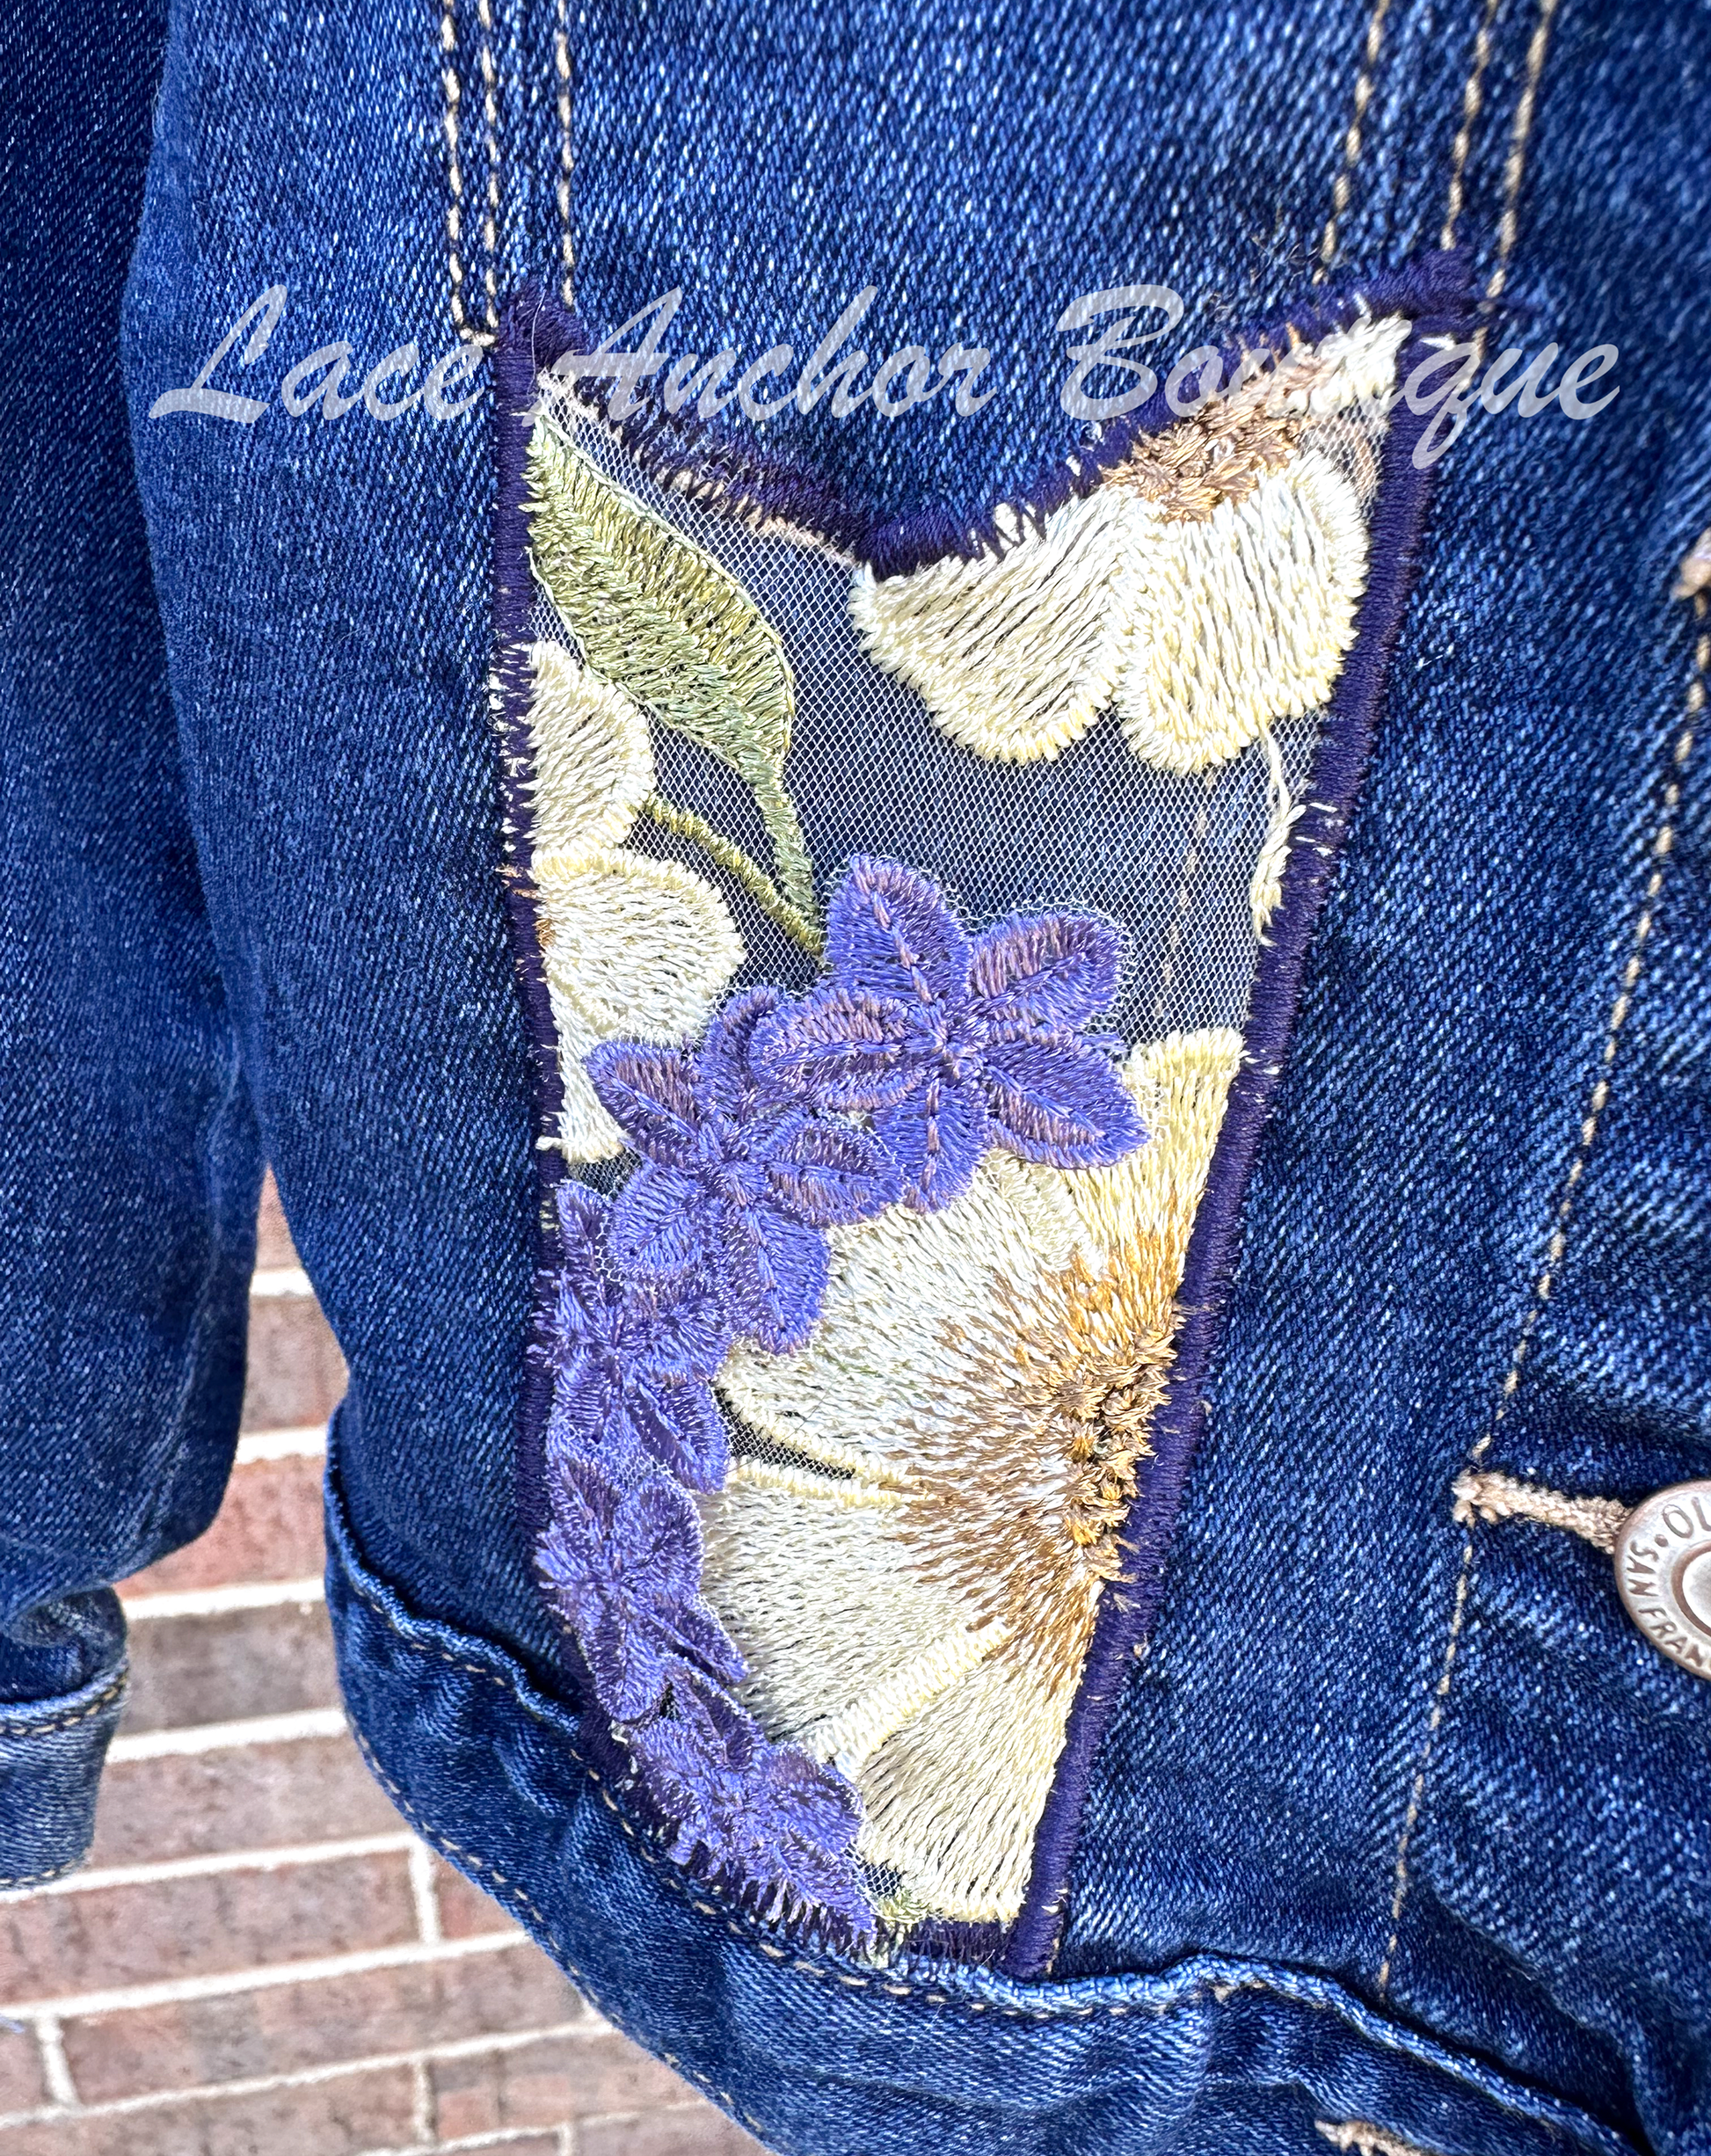 custom handmade upcycle toddler girls denim jacket with 3D floral emboridered patch.